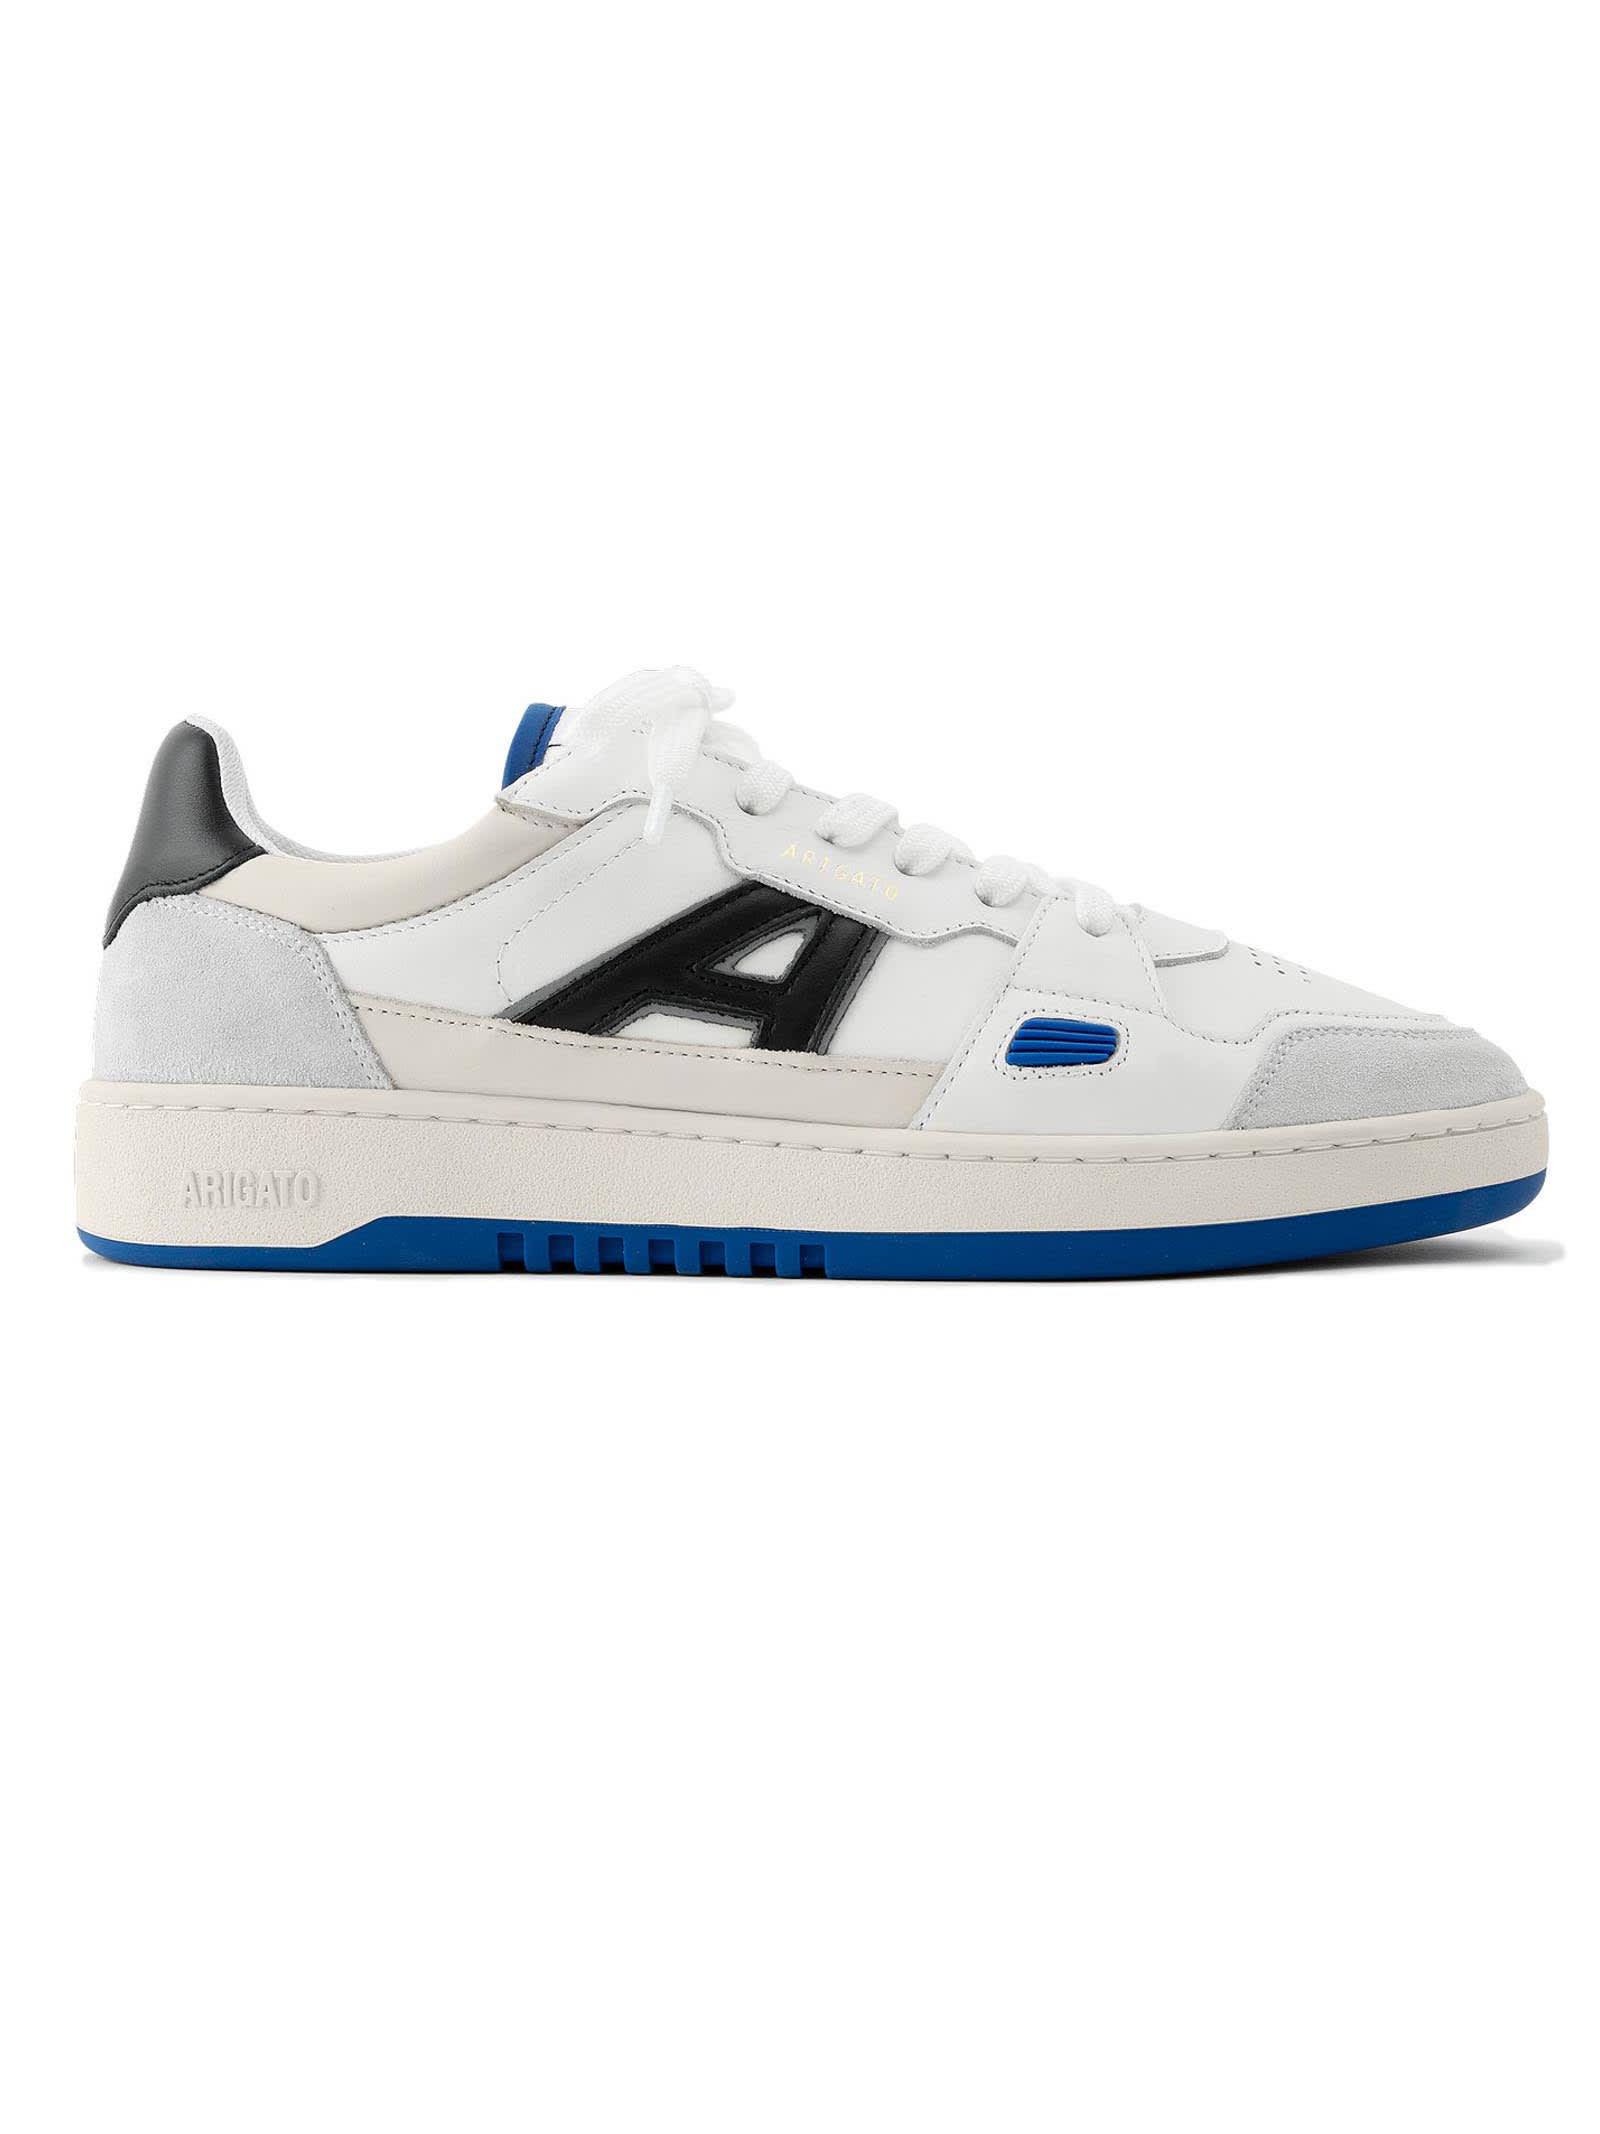 Axel Arigato White And Blue A-dice Leather Sneakers